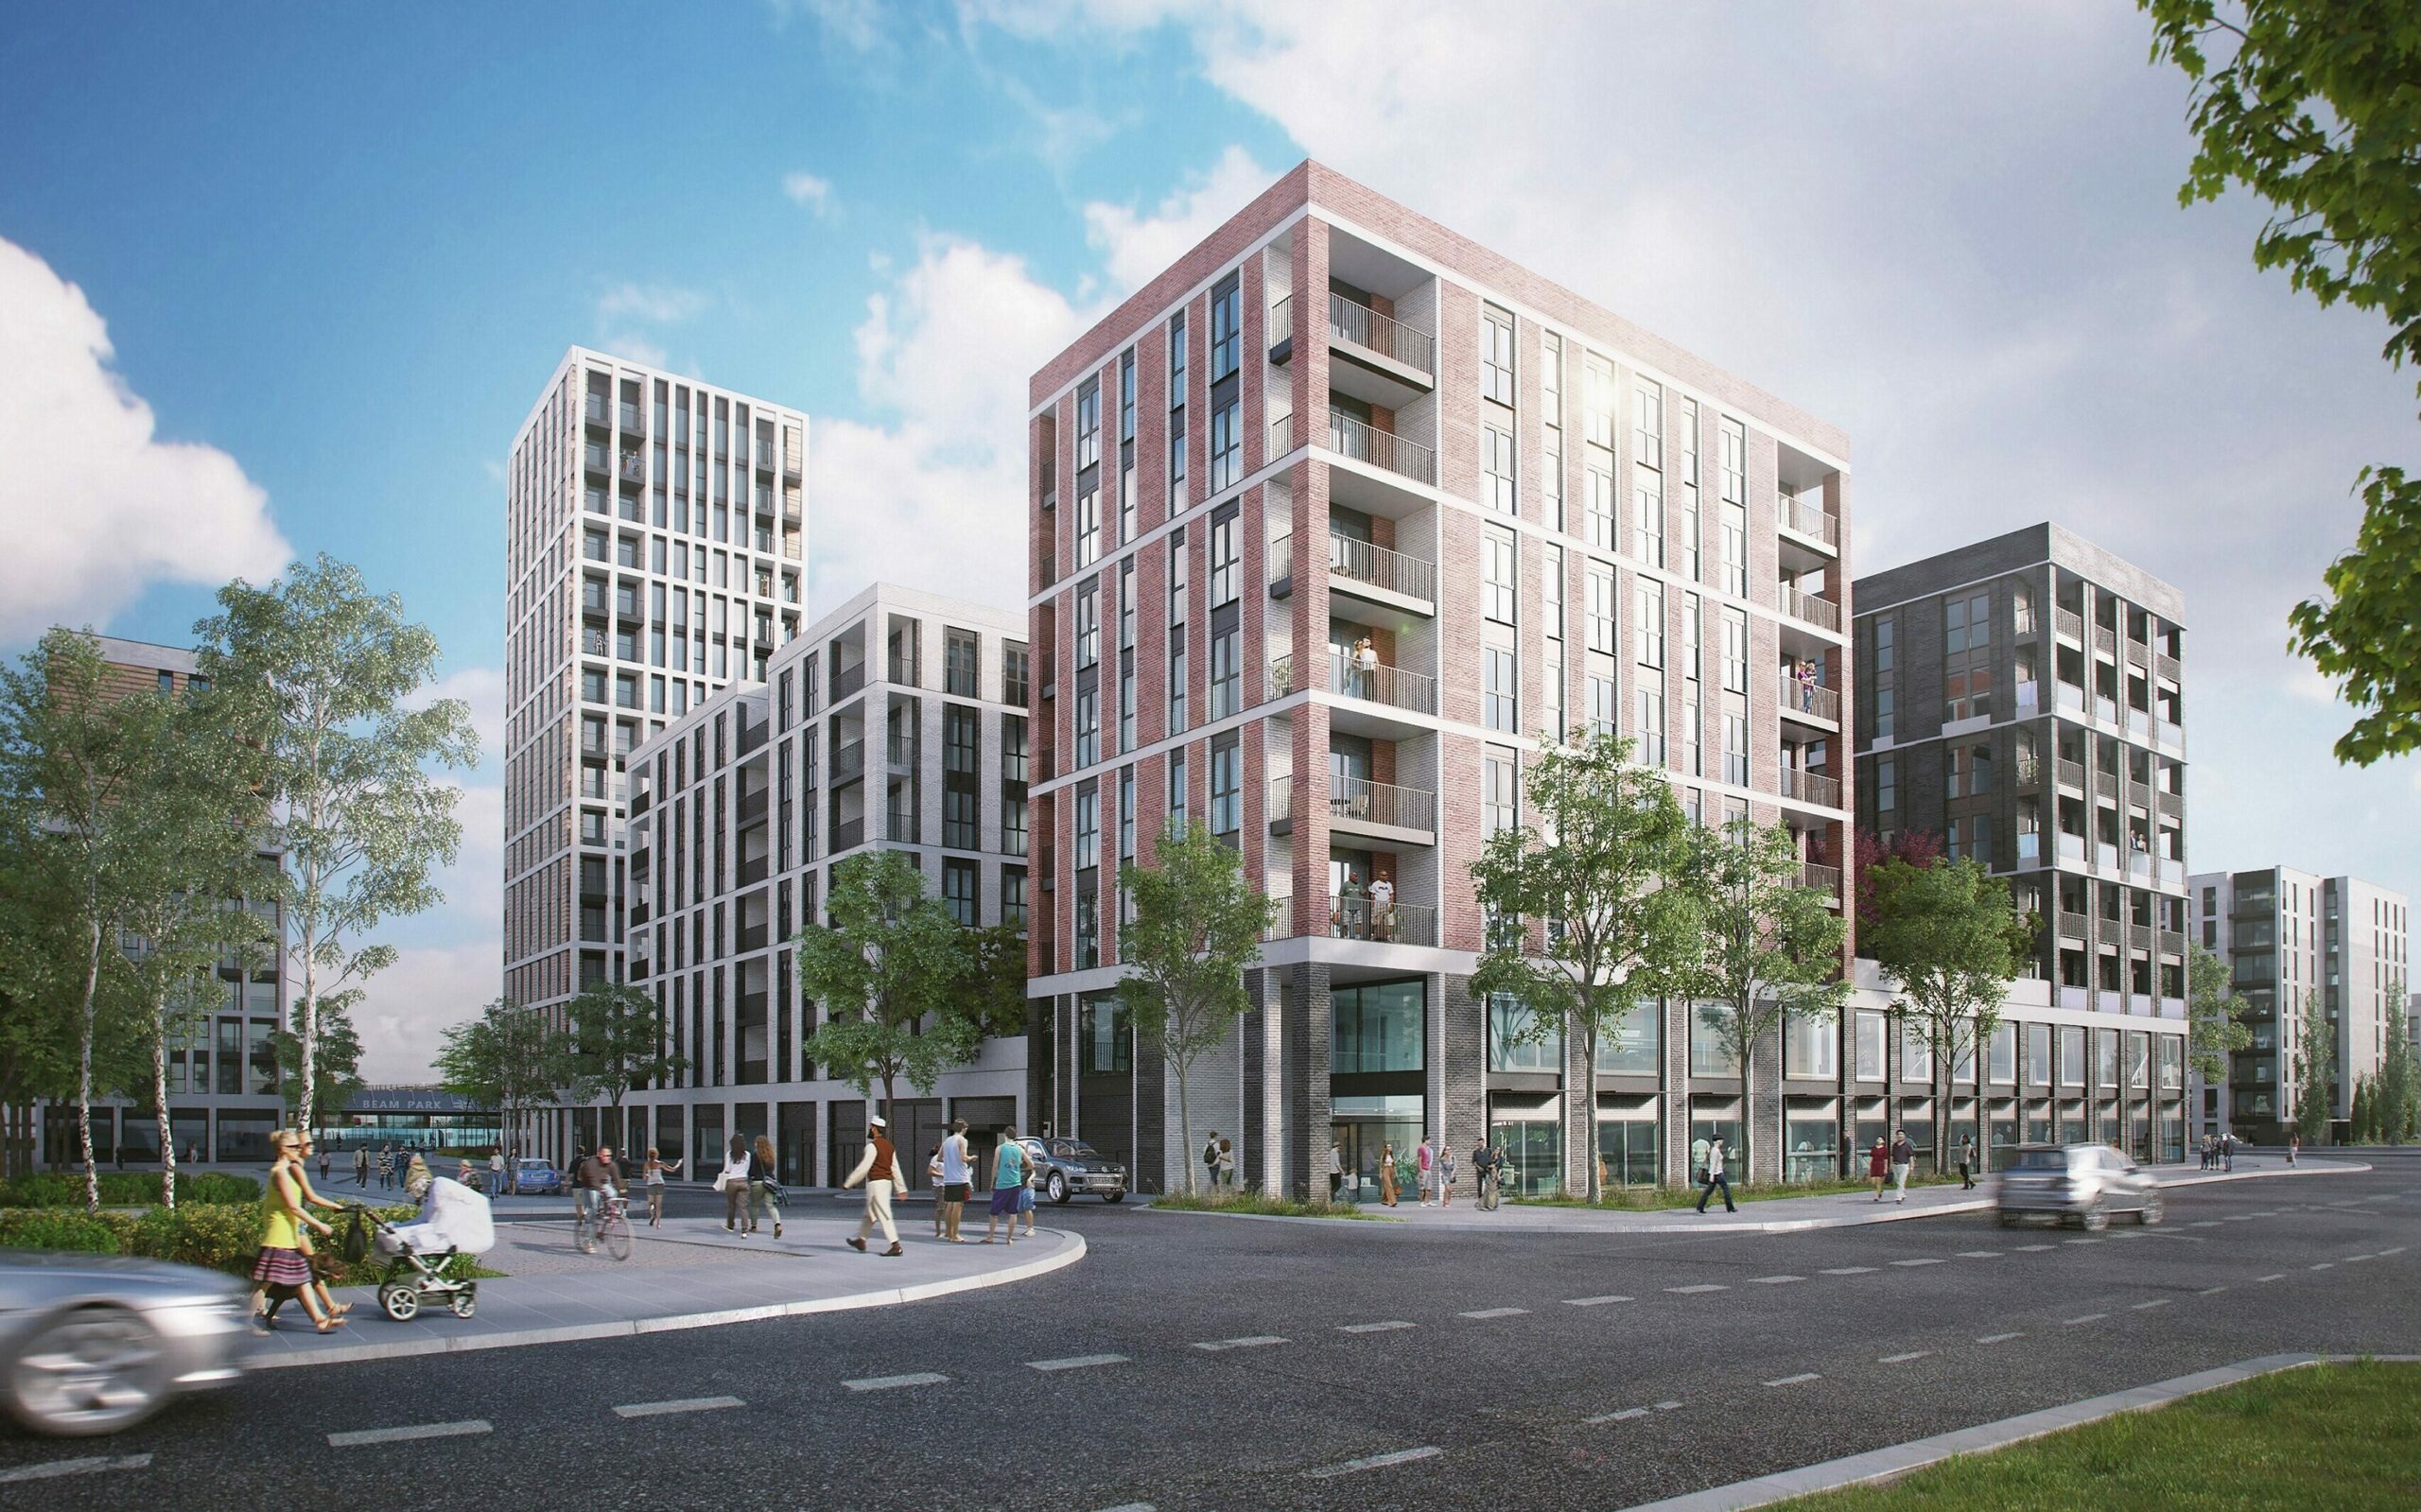 External CGI Of L&Q's Beam Park available to purchase through Shared Ownership schemes on Share to Buy